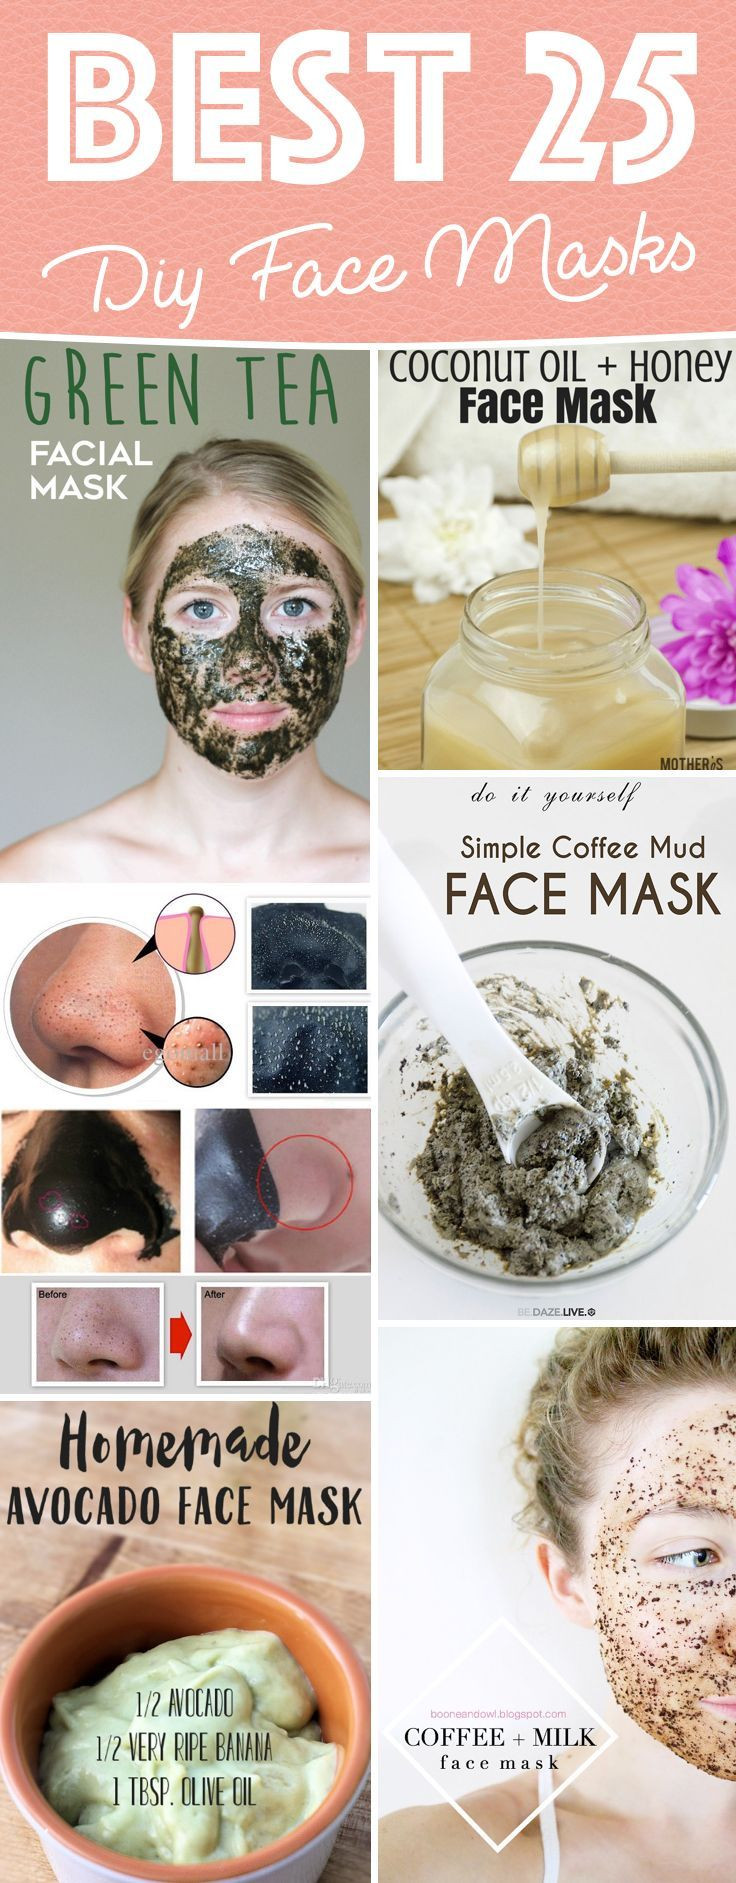 Best DIY Face Mask
 25 DIY Face Masks Casting A Magical Spell on Your Skin